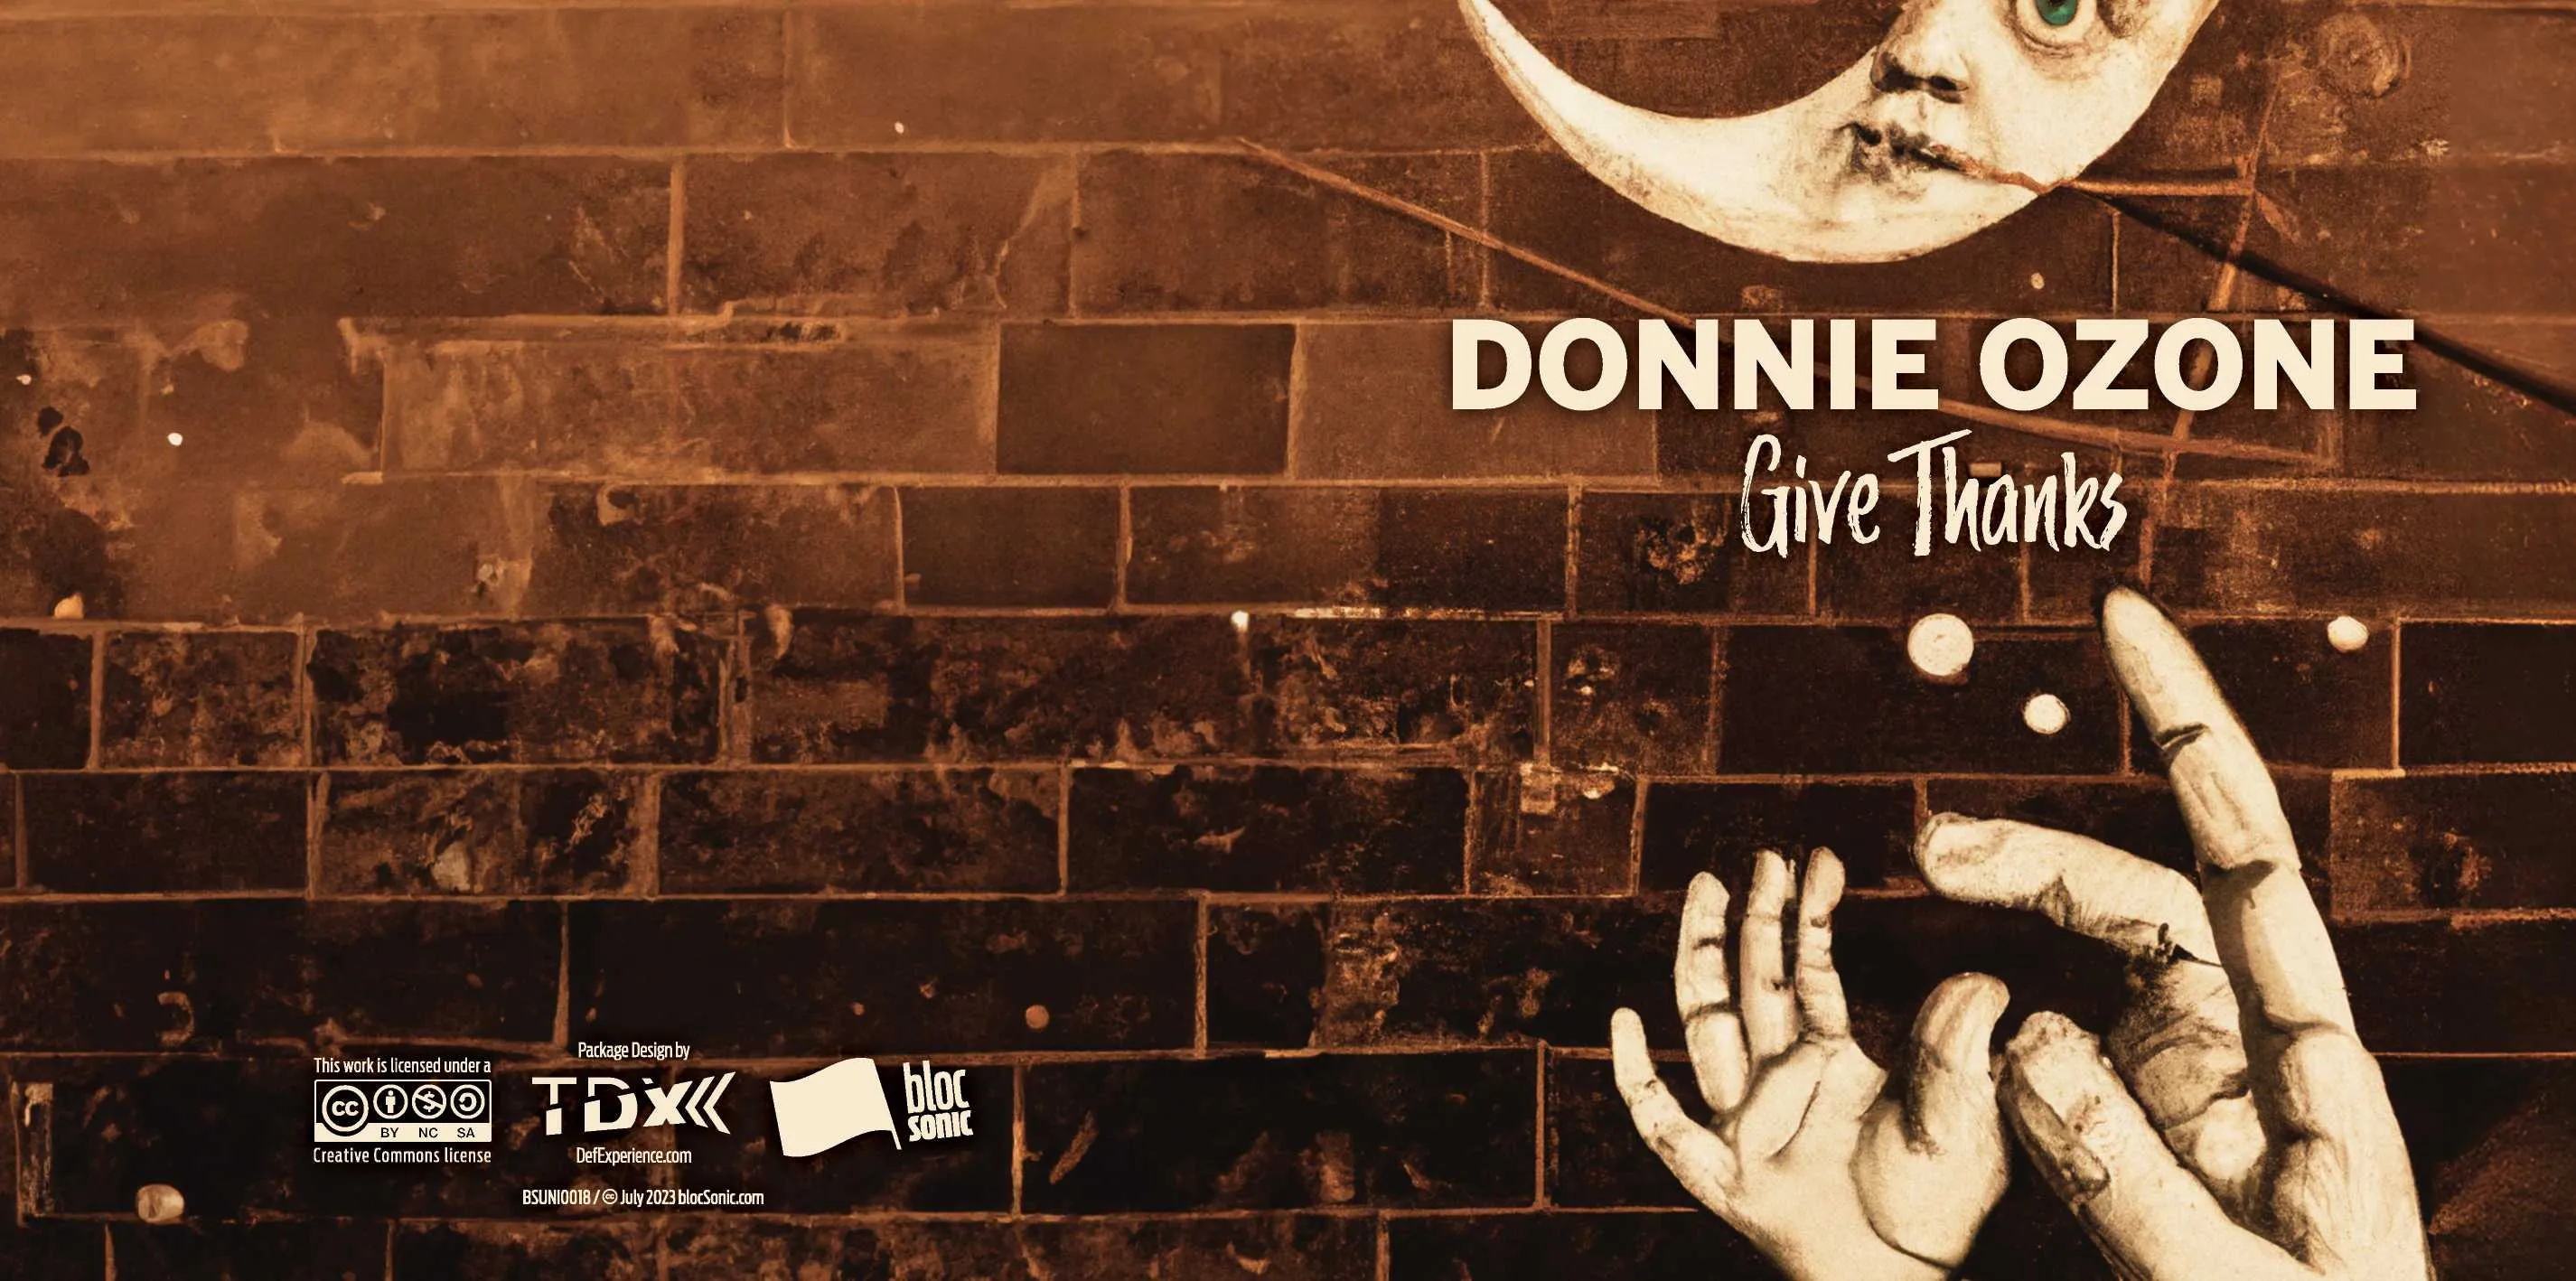 Album insert for “Give Thanks” by Donnie Ozone